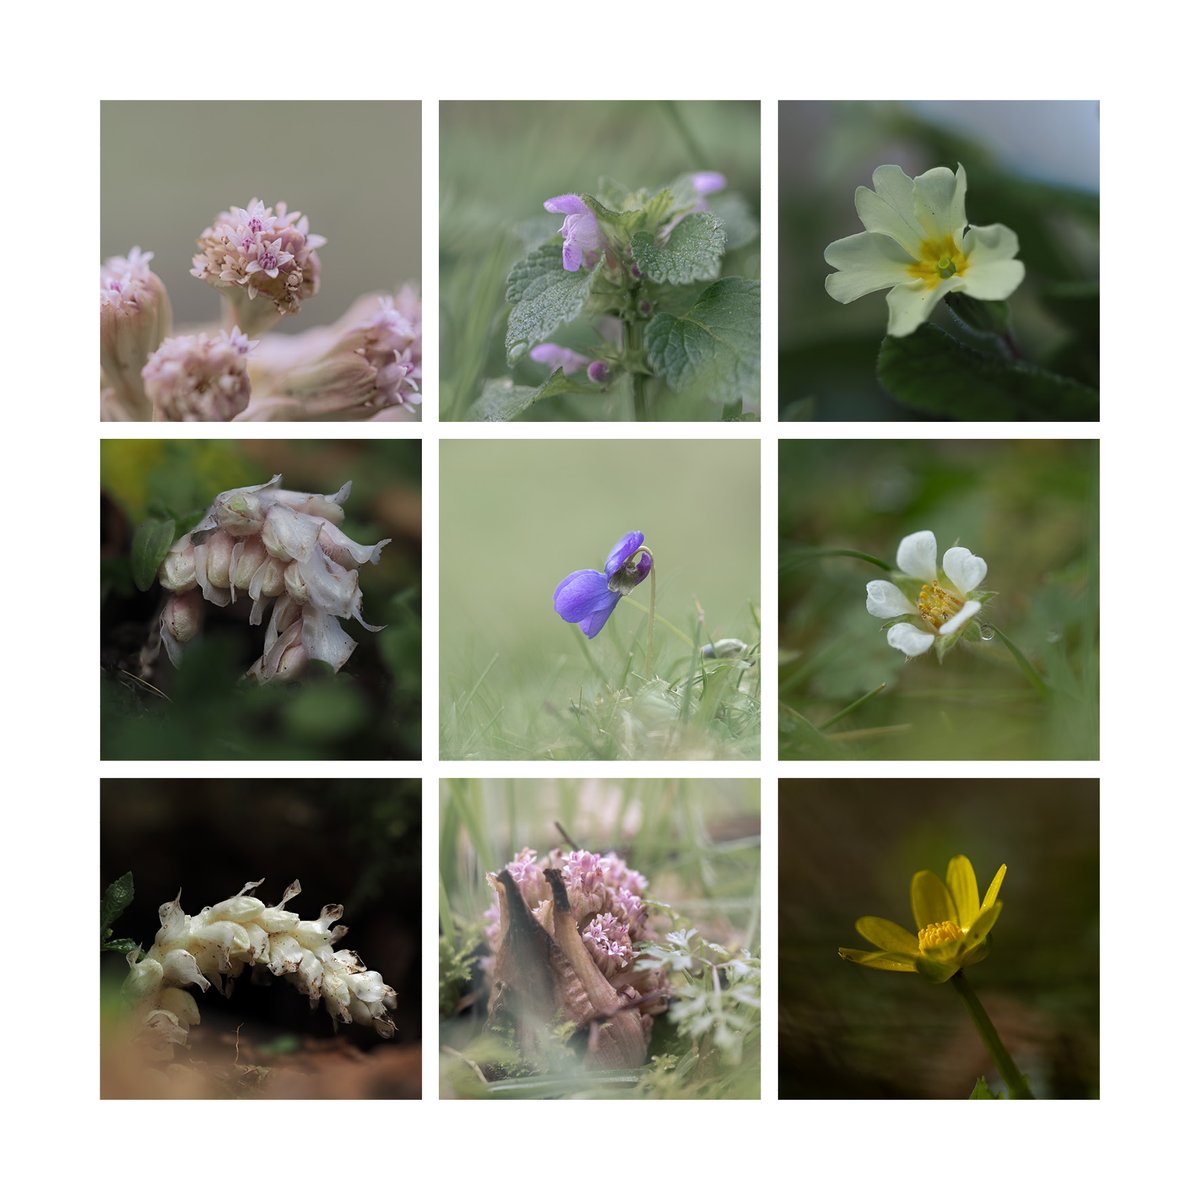 I missed #wildlfowerhour last night, I'm still getting over covid, here's who I would have posted: Butterbur, Red Deadnettle, Primrose, Toothwort, Sweet Violet, Barren Strawberry and Lesser Celendine, all encountered around the village.